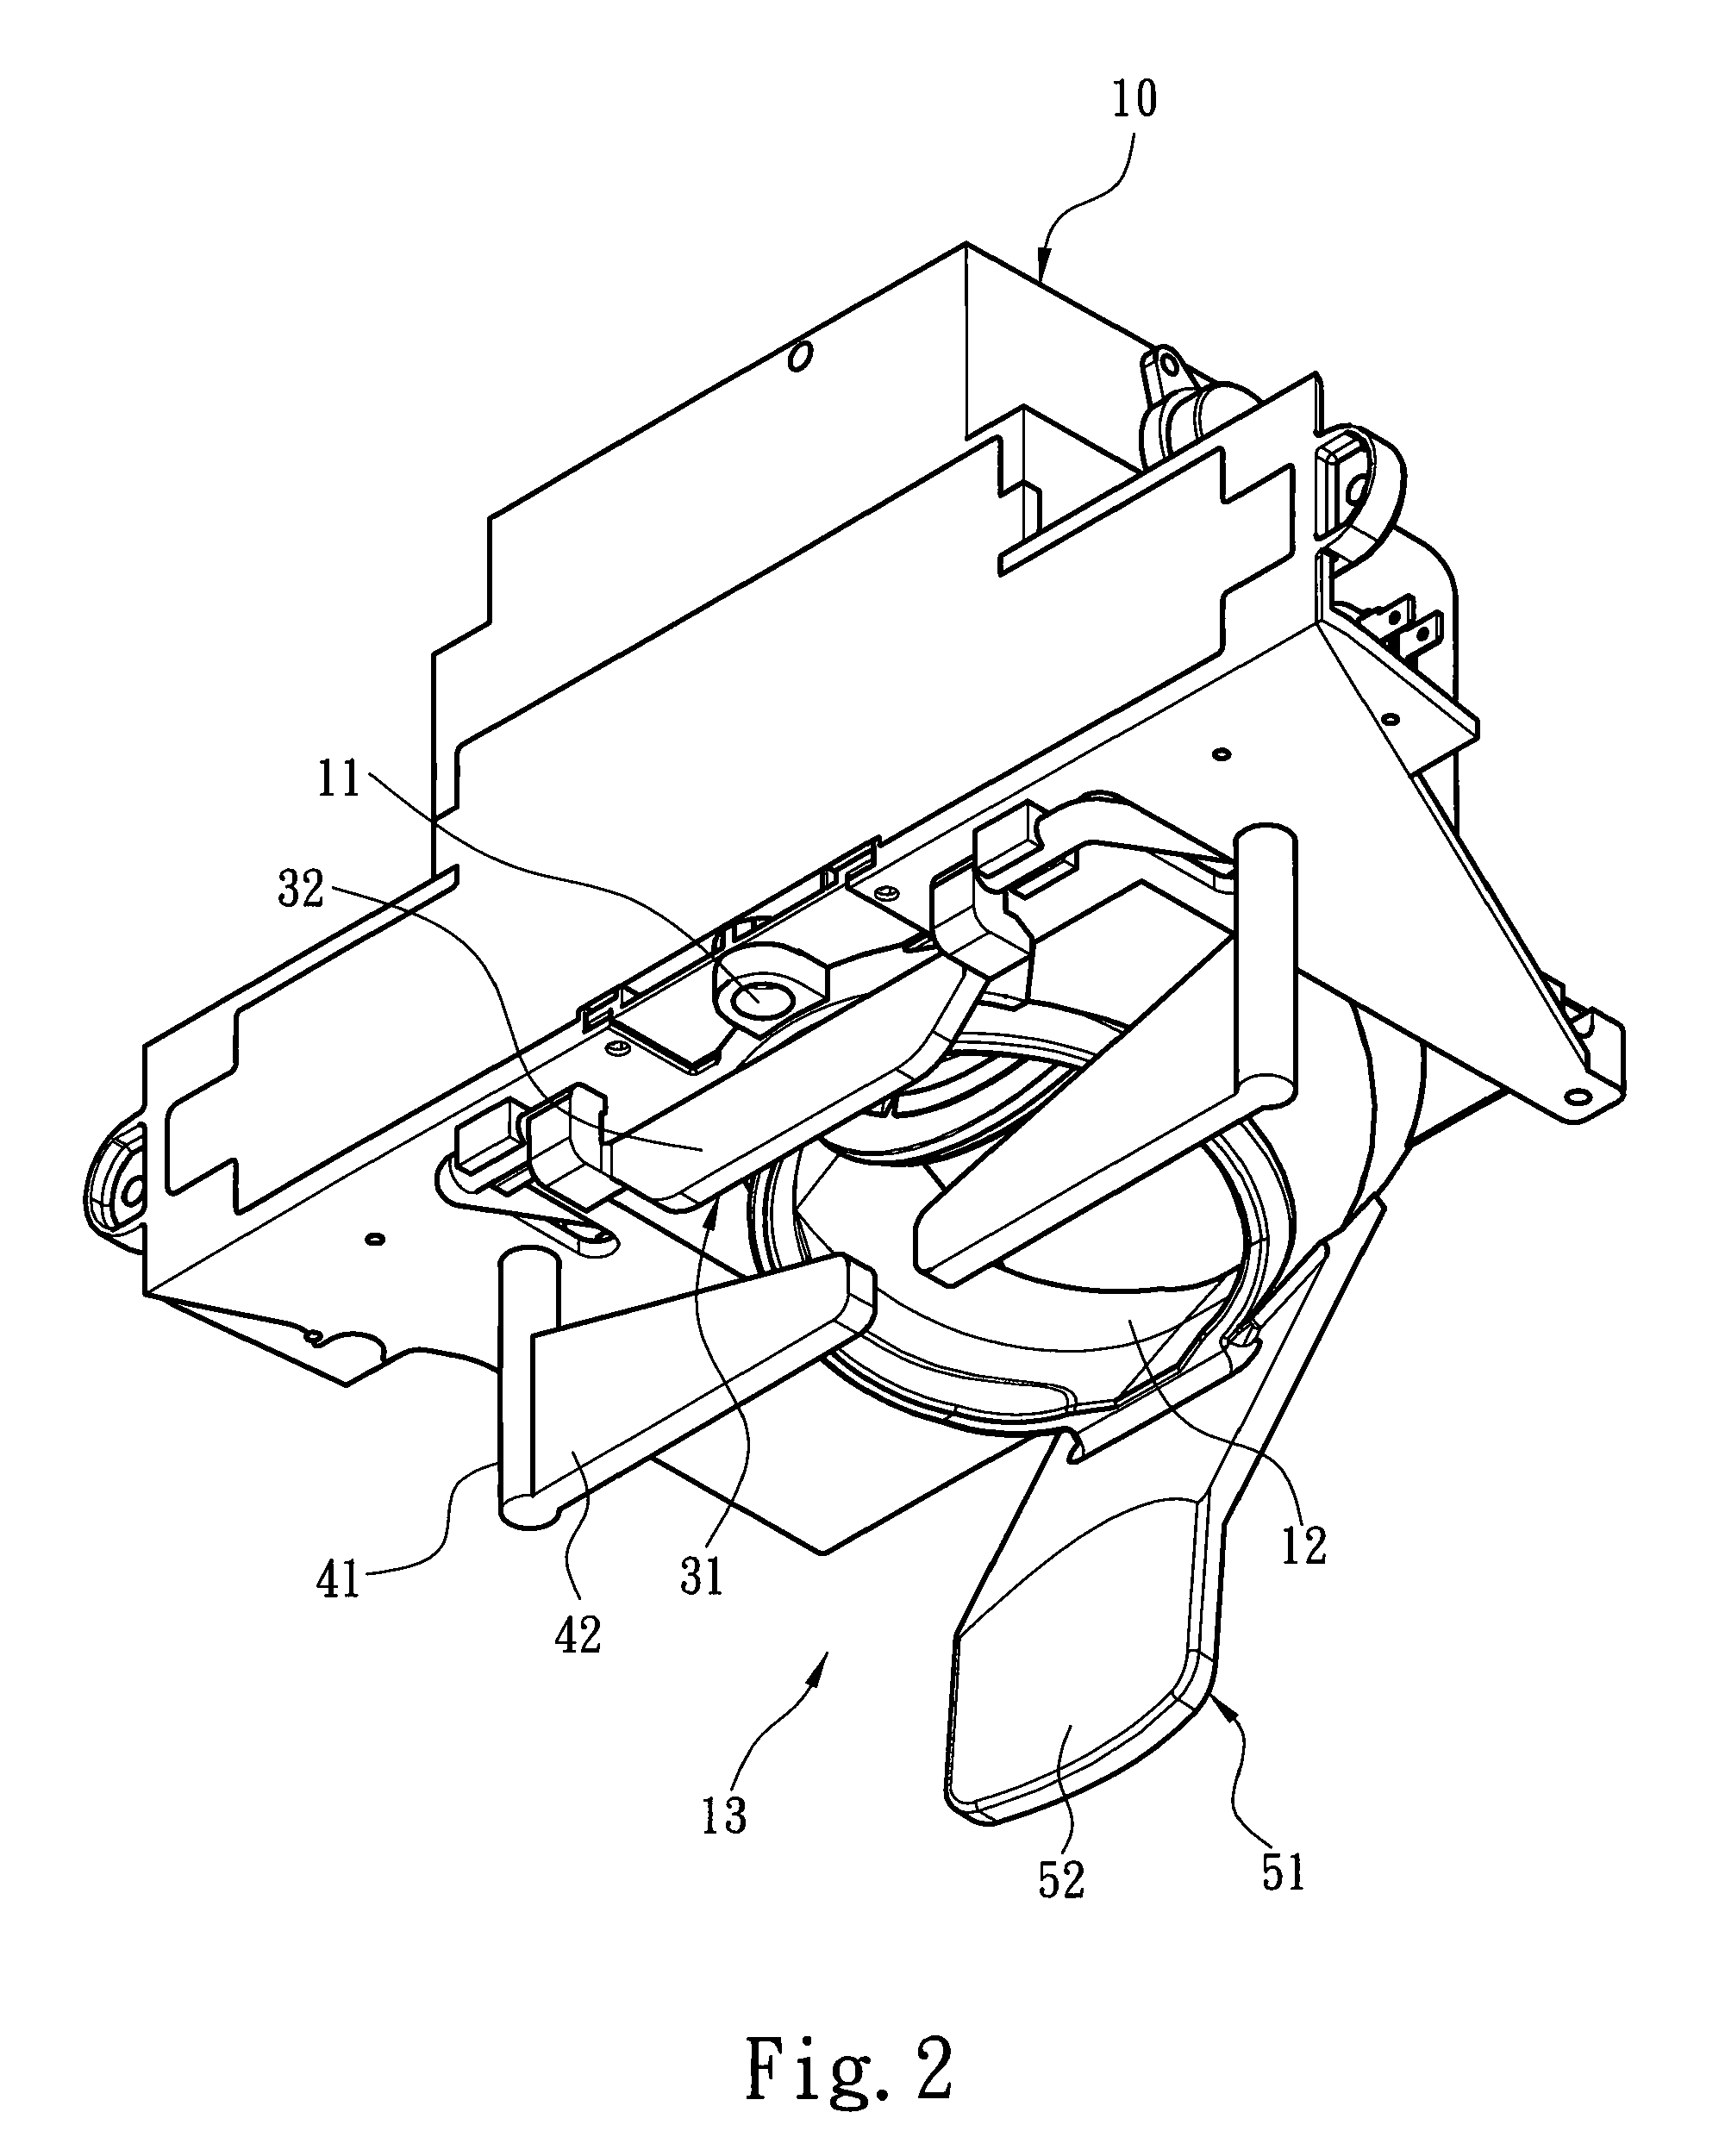 Dispensing control device for icemaker